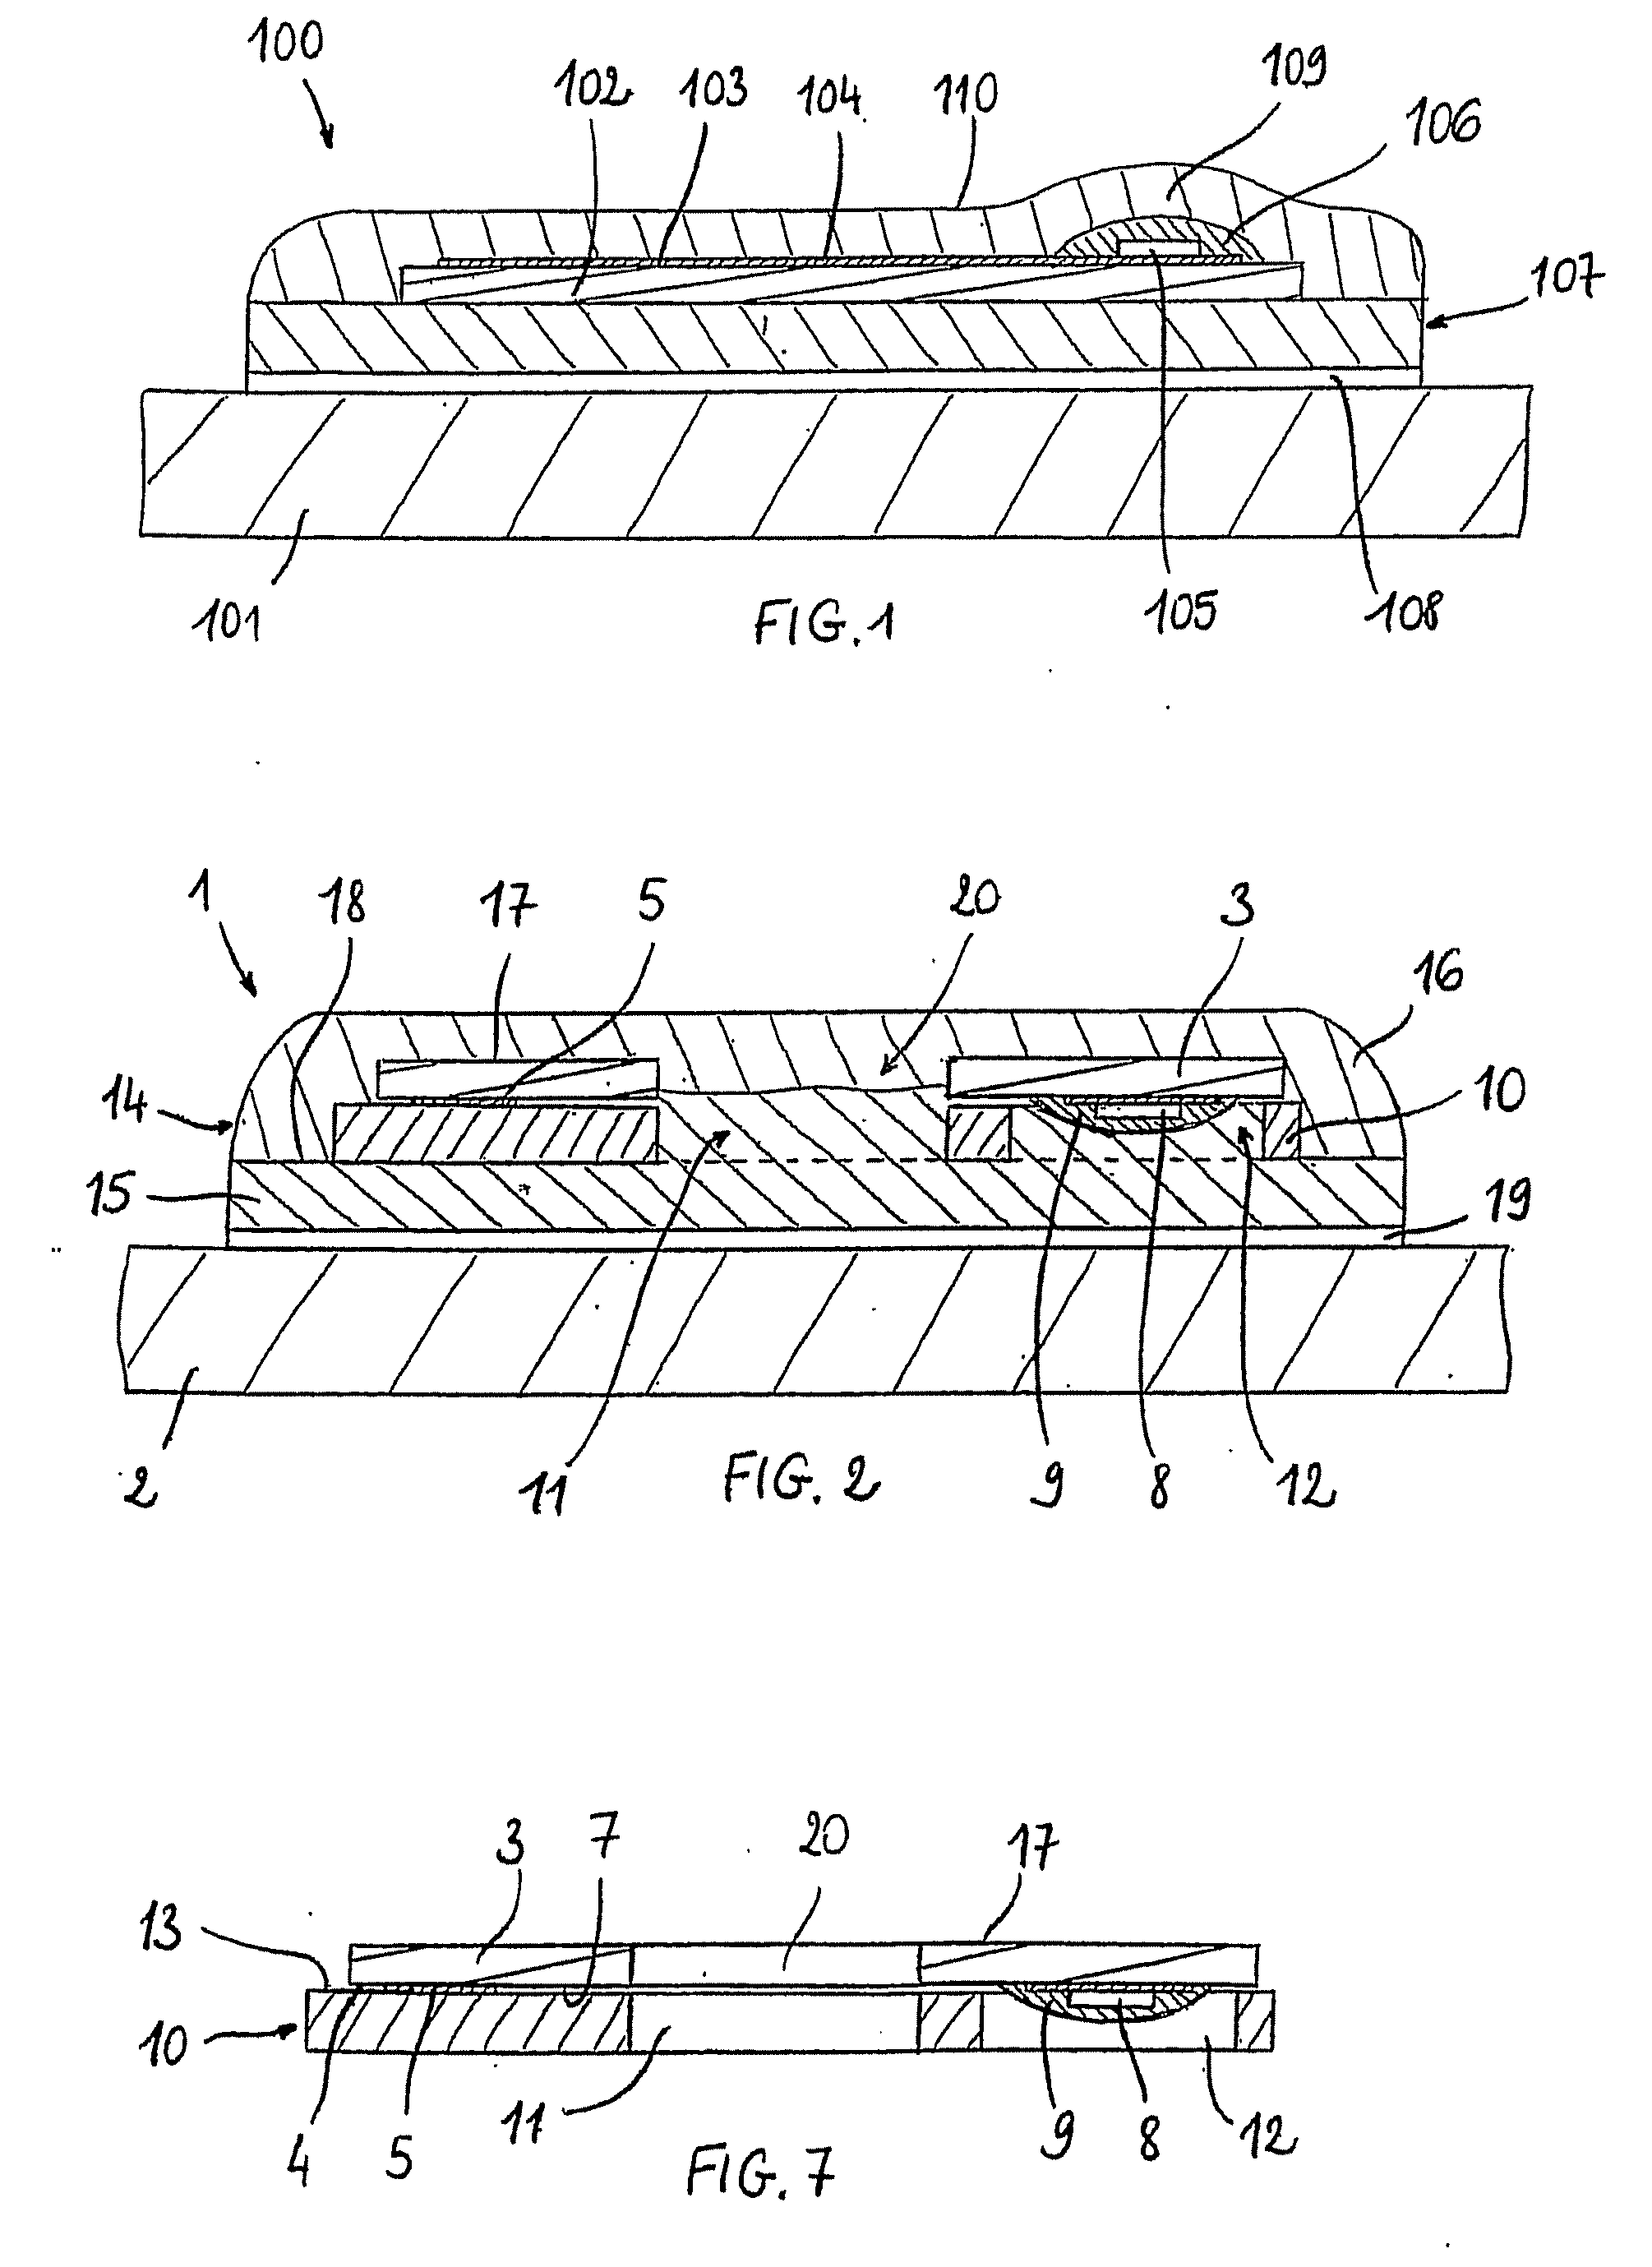 Radiofrequency identification device and method for producing said device